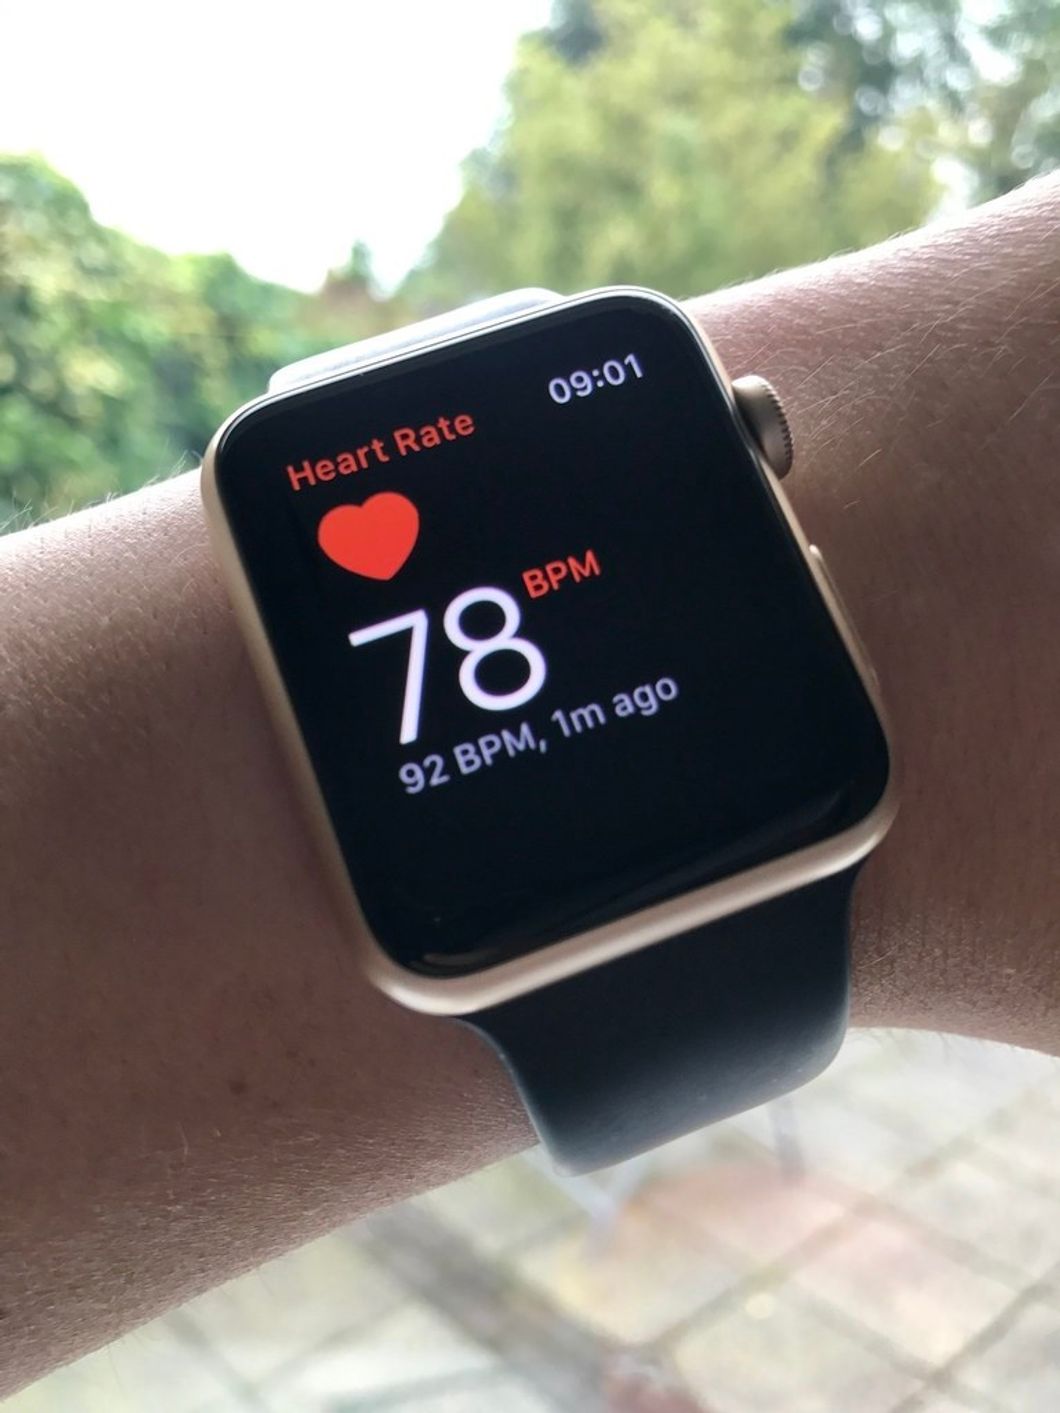 7 Reasons To Buy An Apple Watch